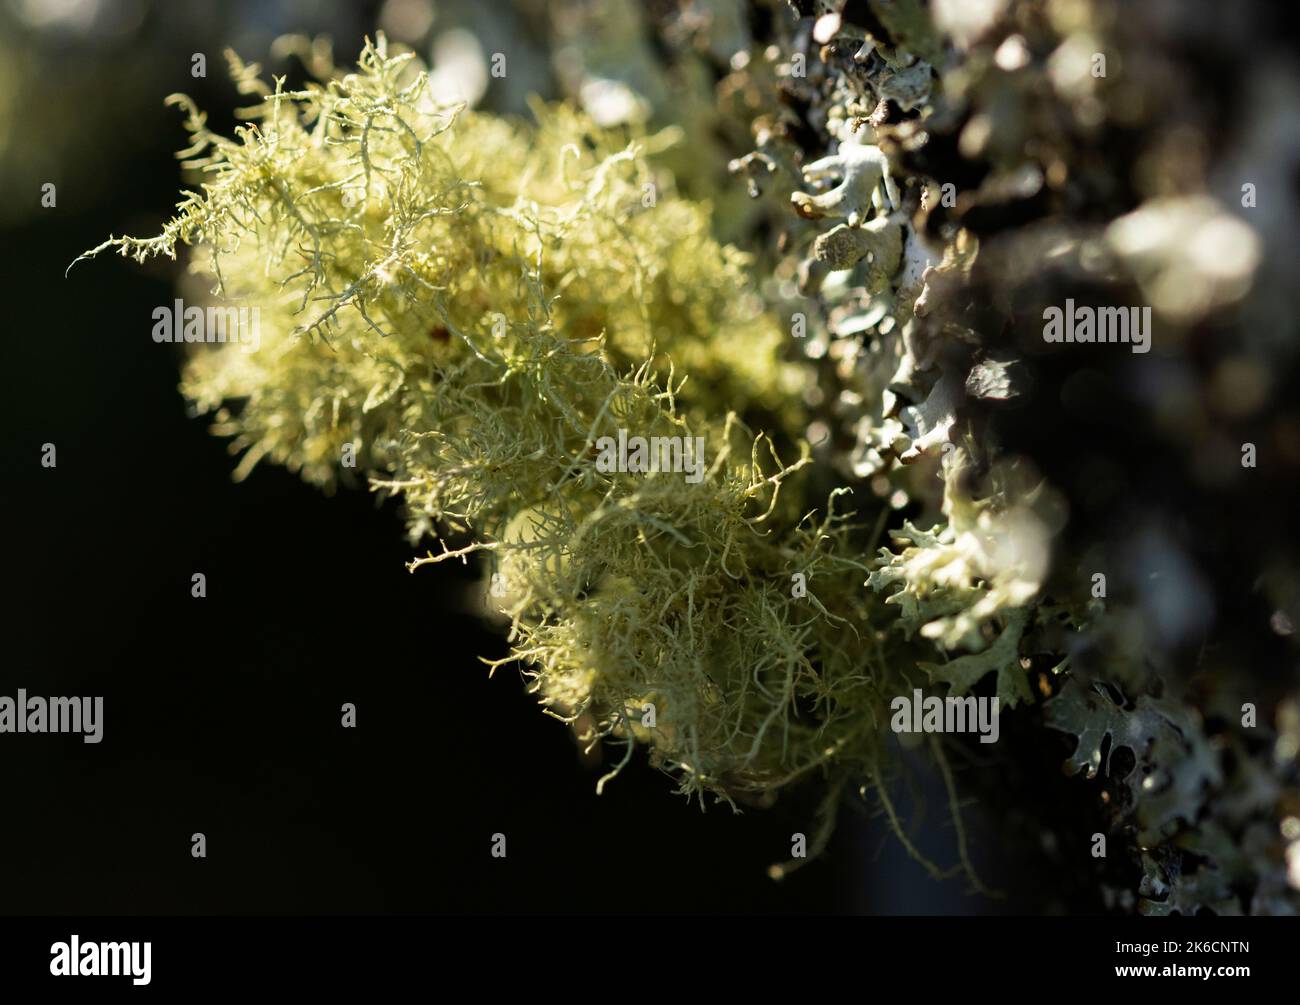 Lichens are a plant-like mutualistically symbiotic fungus and algae living together. They are hardy and are the first living organism to colonise. Stock Photo